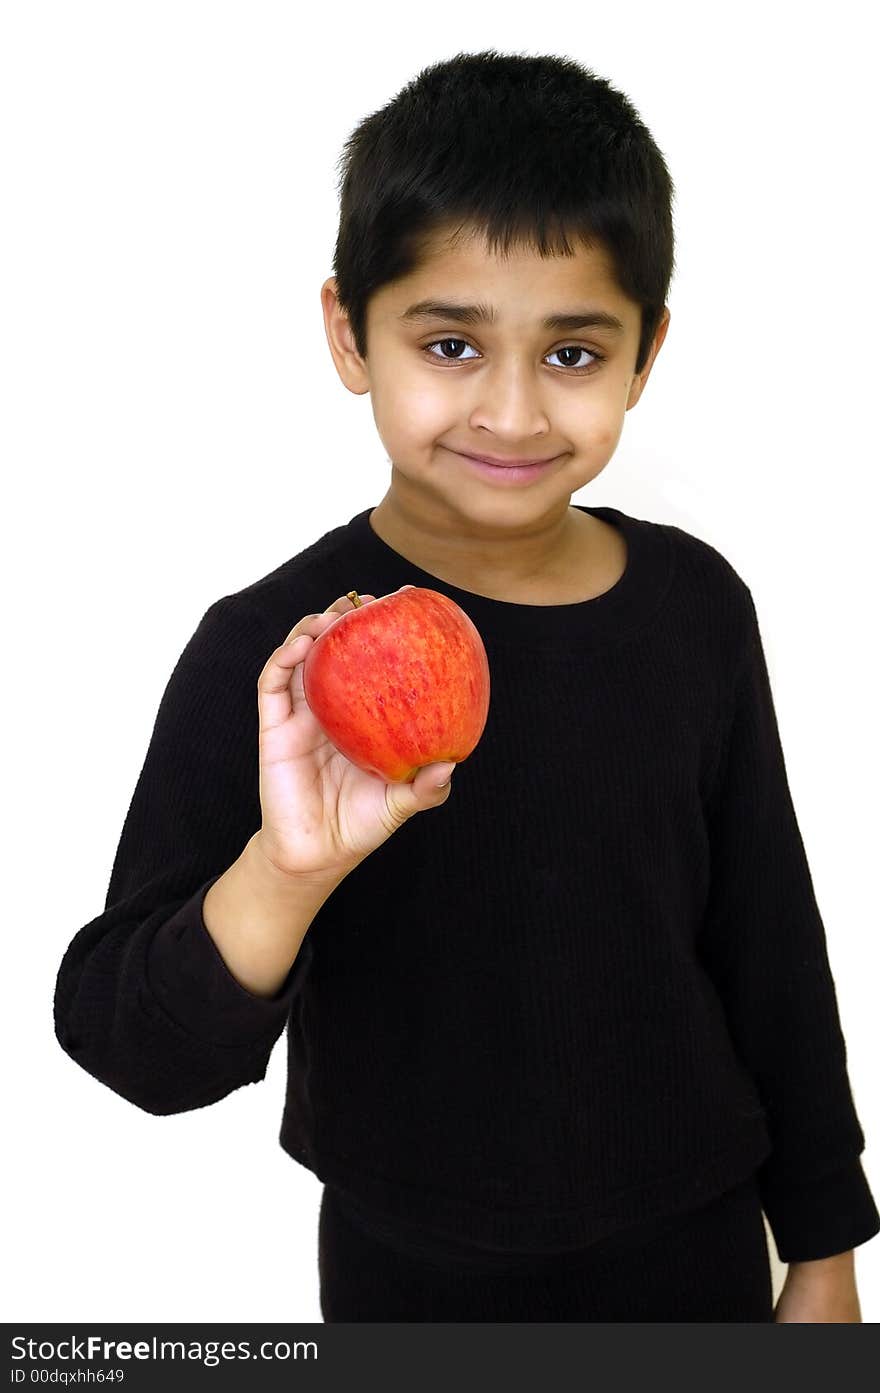 An handsome indian kid holding a red apple. An handsome indian kid holding a red apple